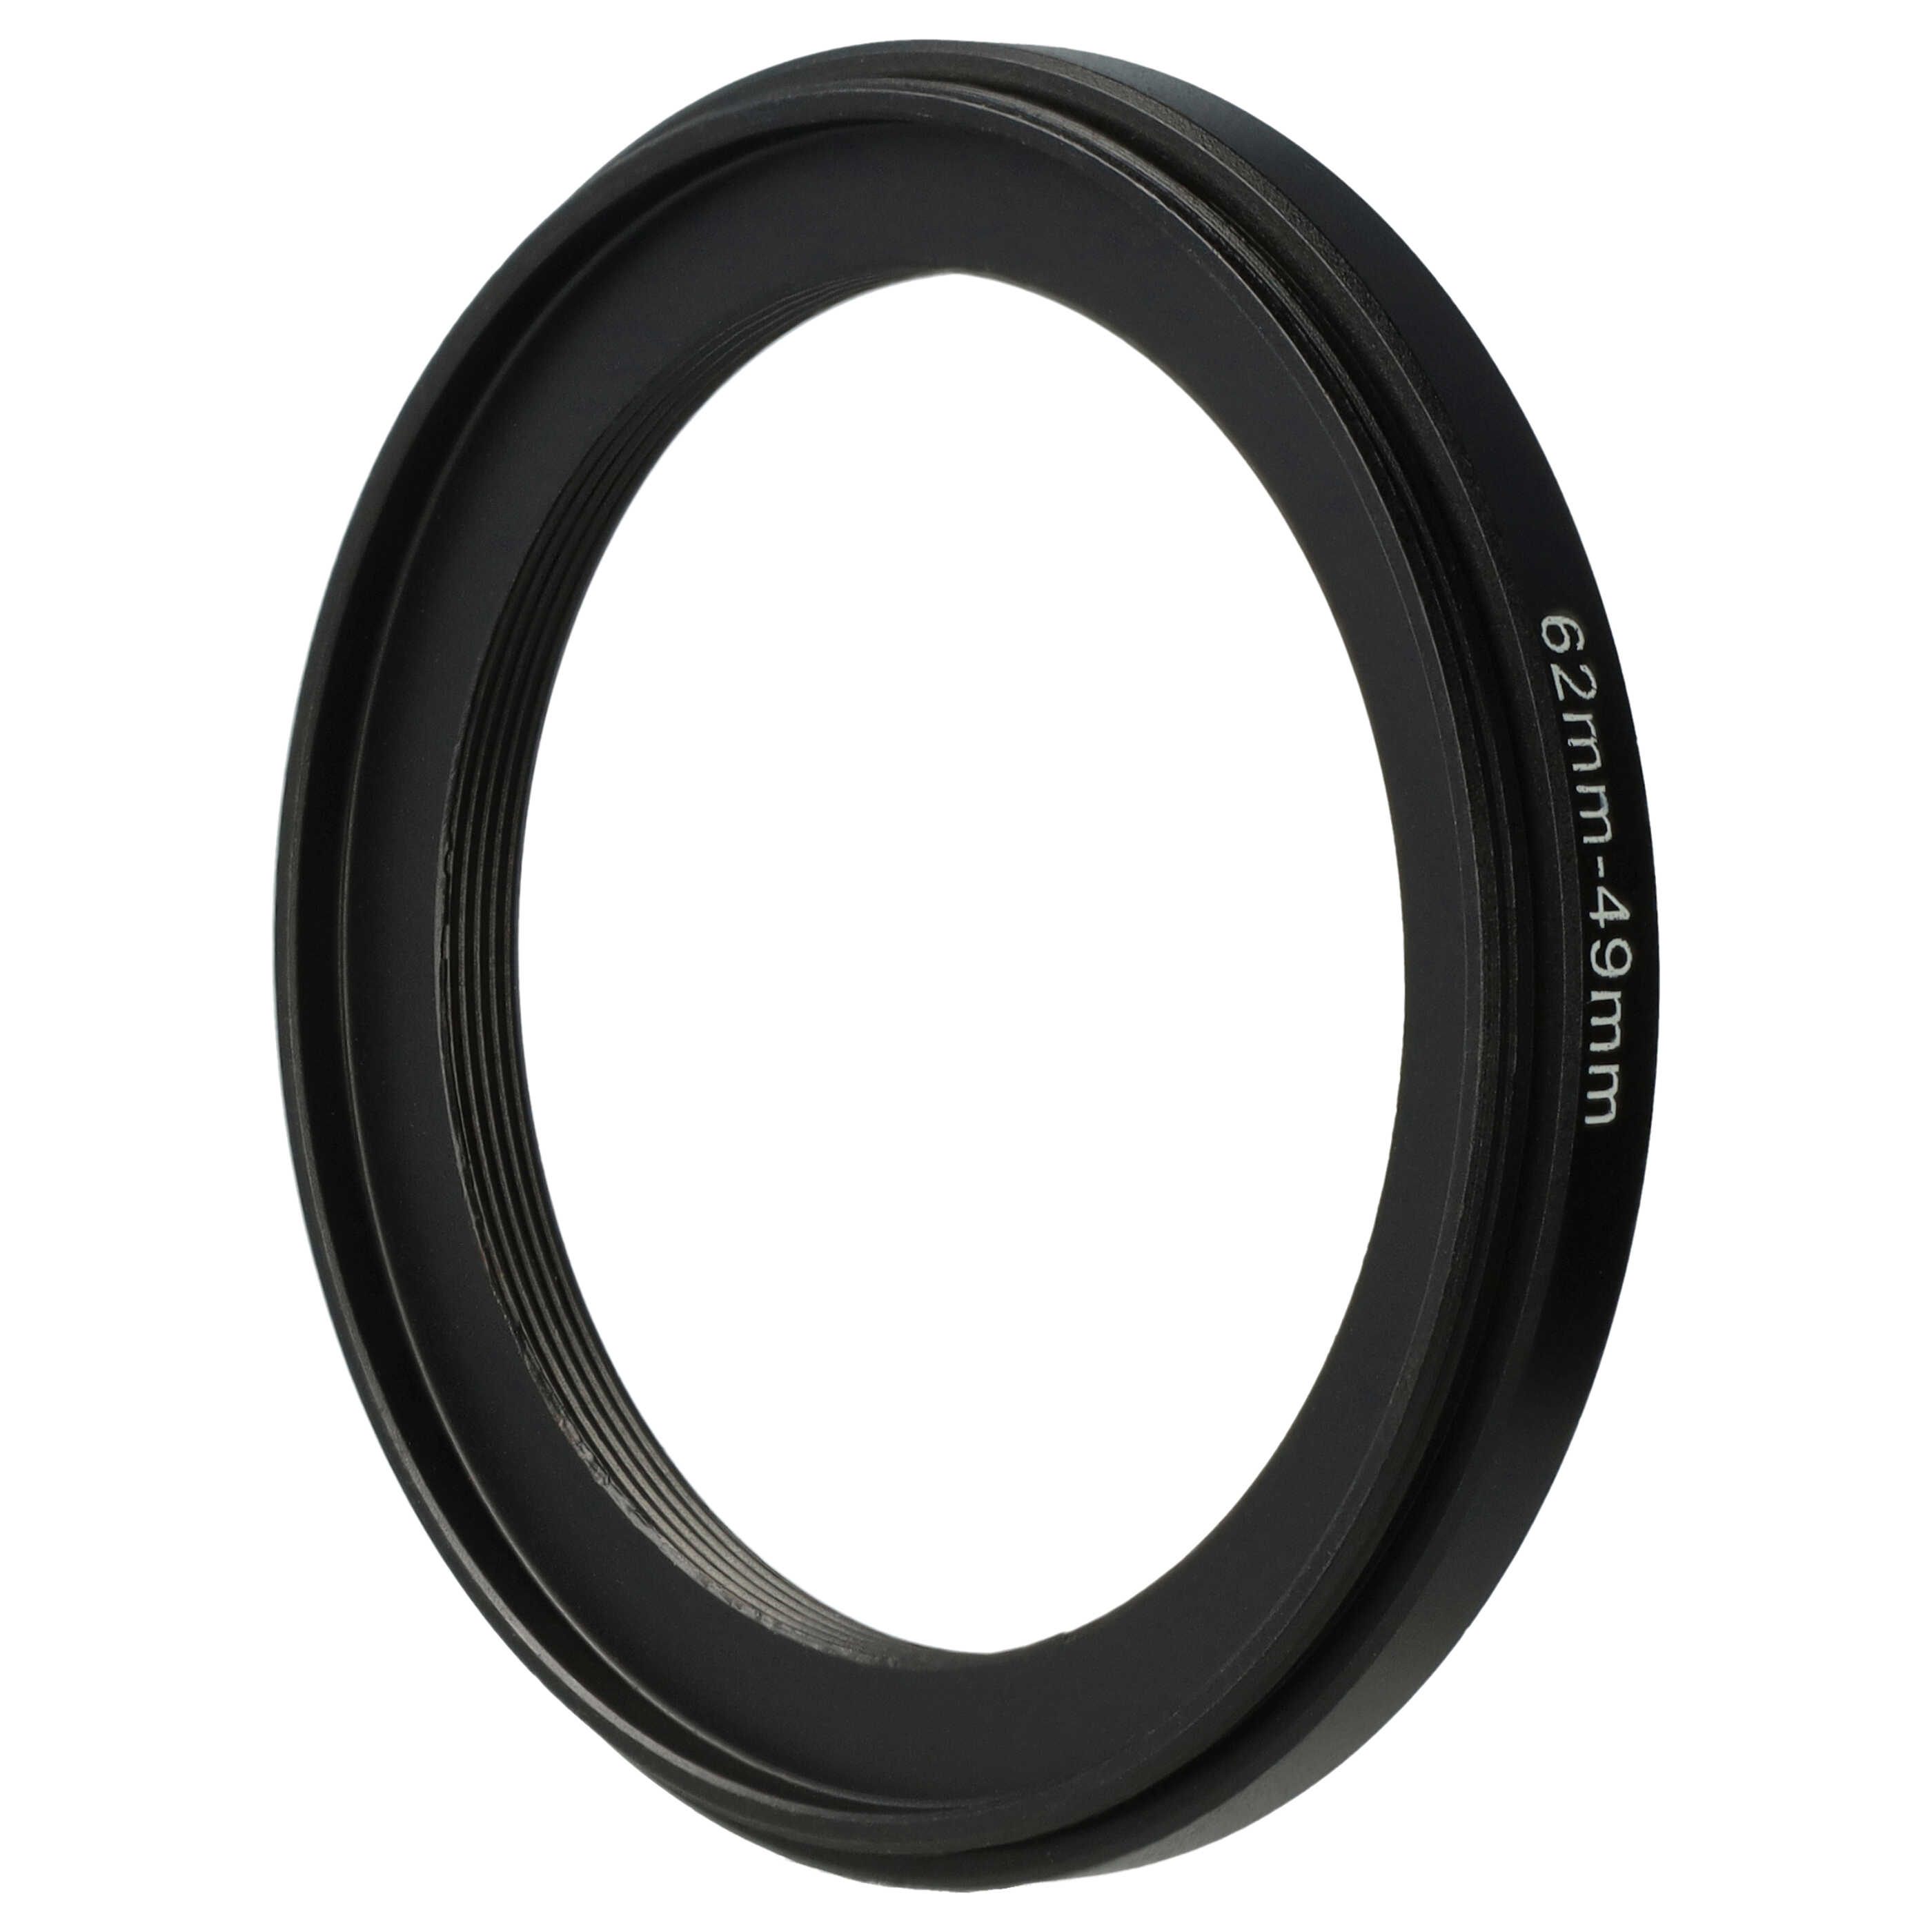 Step-Down Ring Adapter from 62 mm to 49 mm suitable for Camera Lens - Filter Adapter, metal